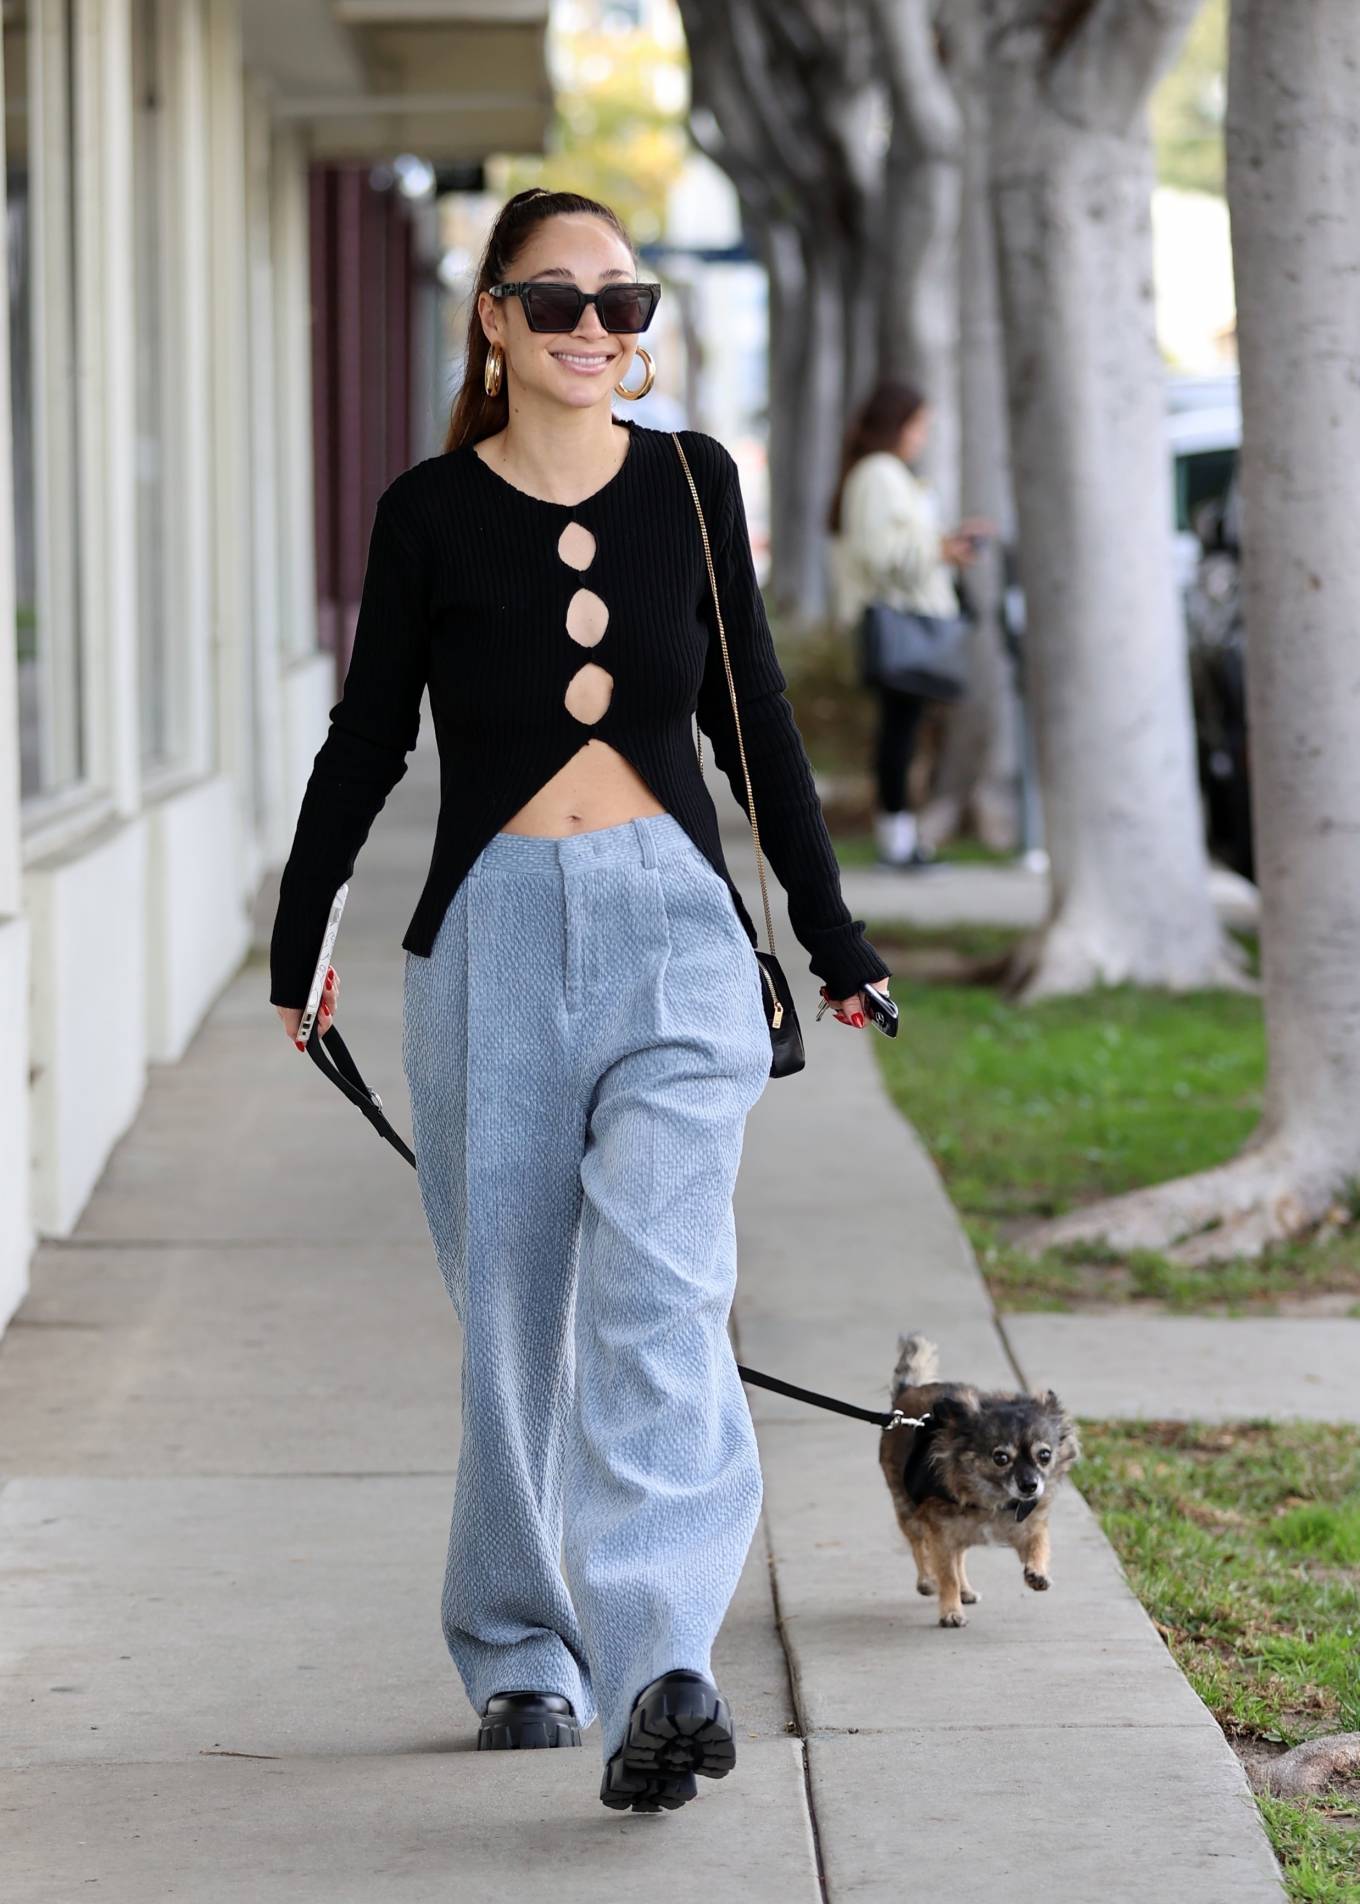 Cara Santana - Heading to a hair salon with her adorable dog in Los Angeles